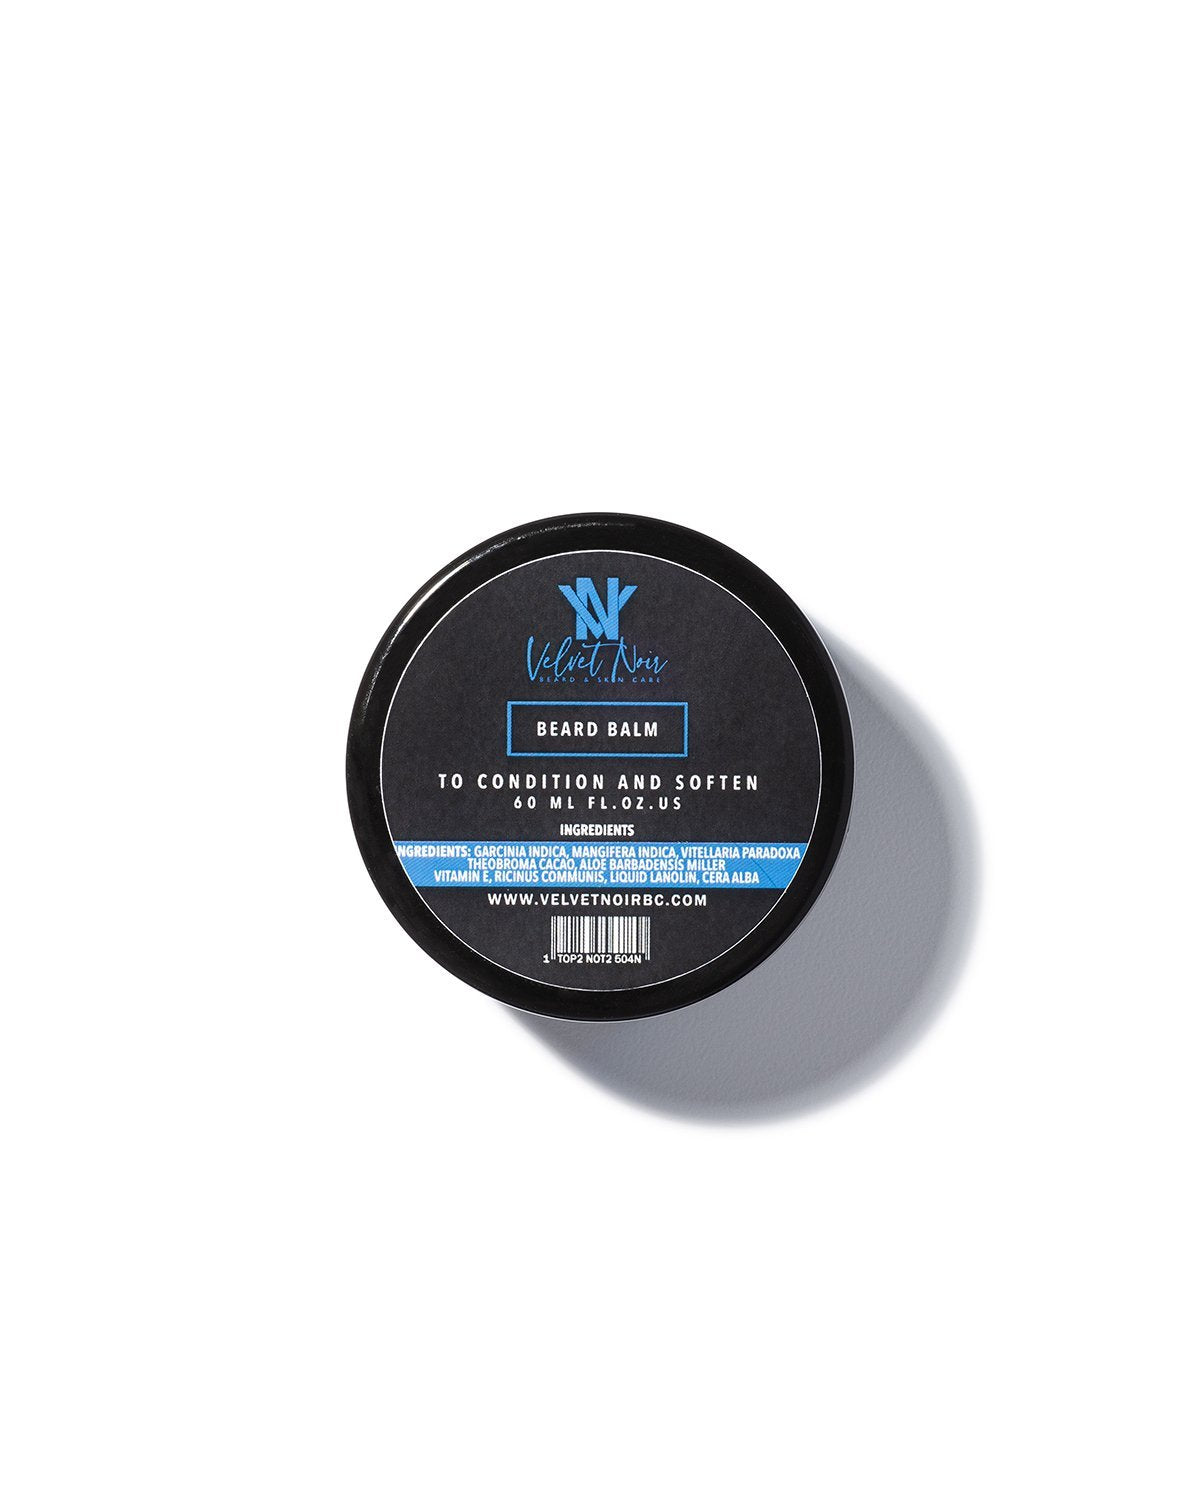 Velvet Noir Beard Balm Beauty Supply store, all natural products for men. The wh shop is the sephora for black owned brands